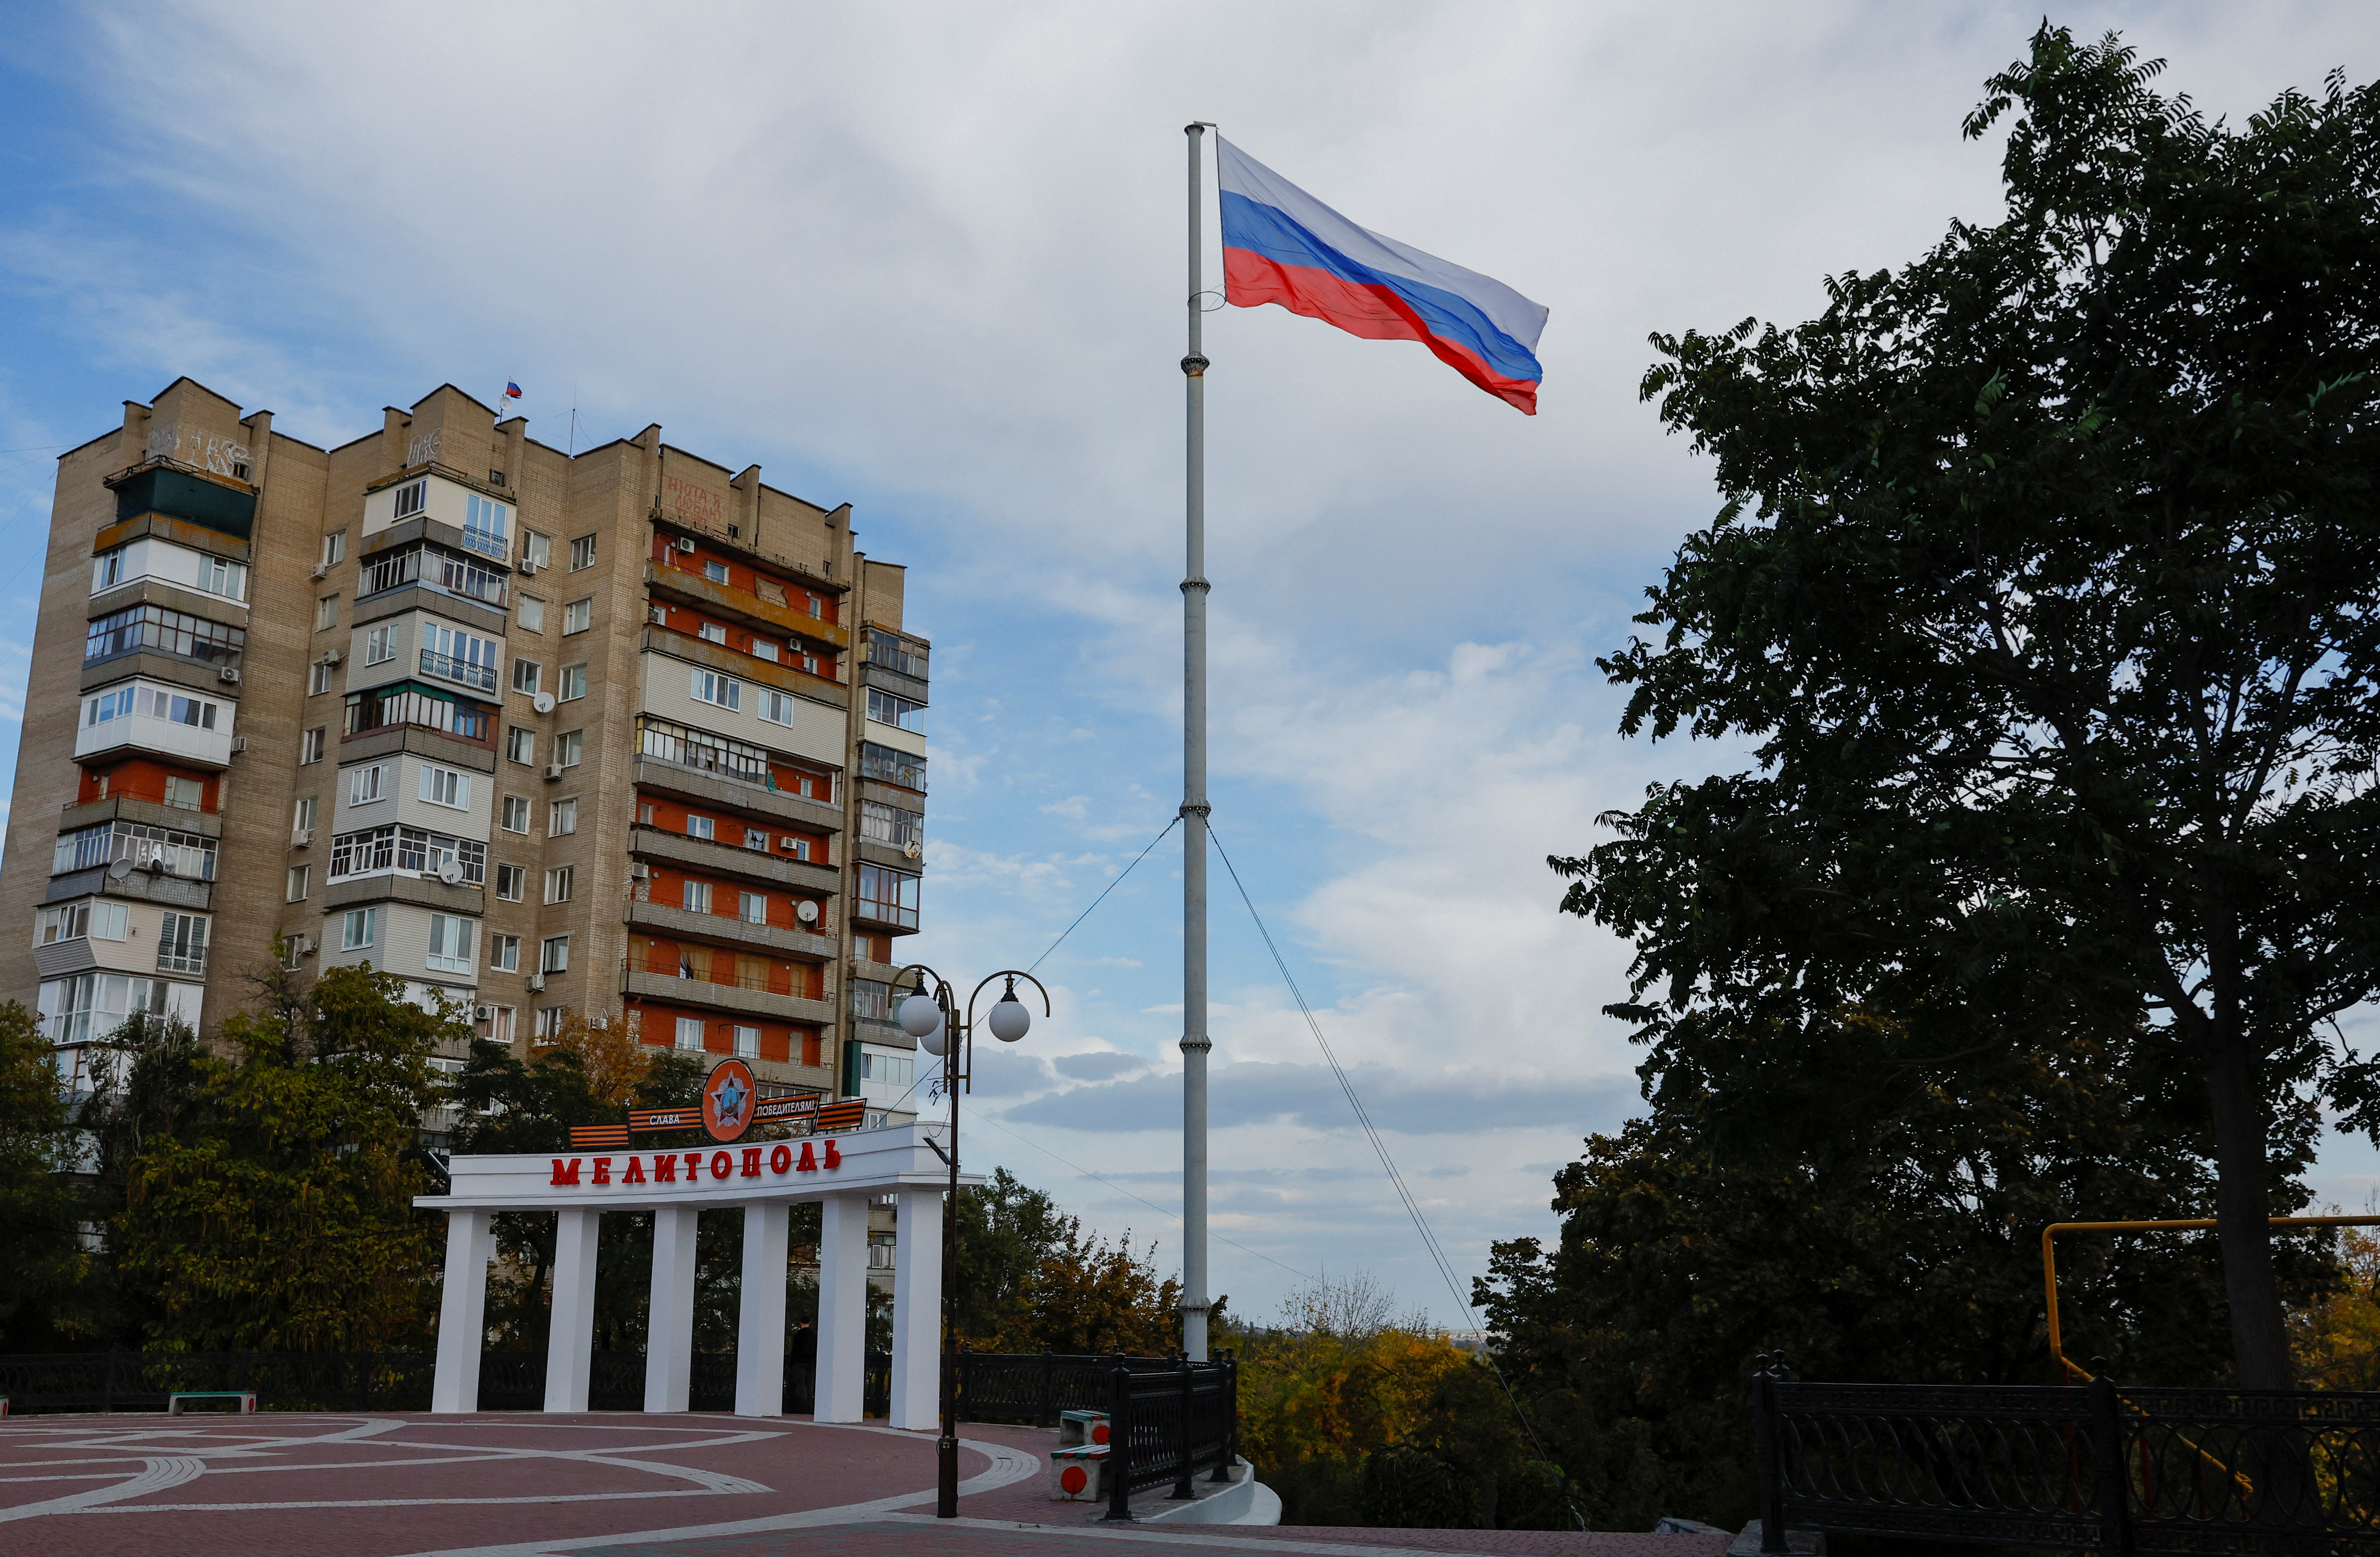 A Russian flag flies in a square in Melitopol